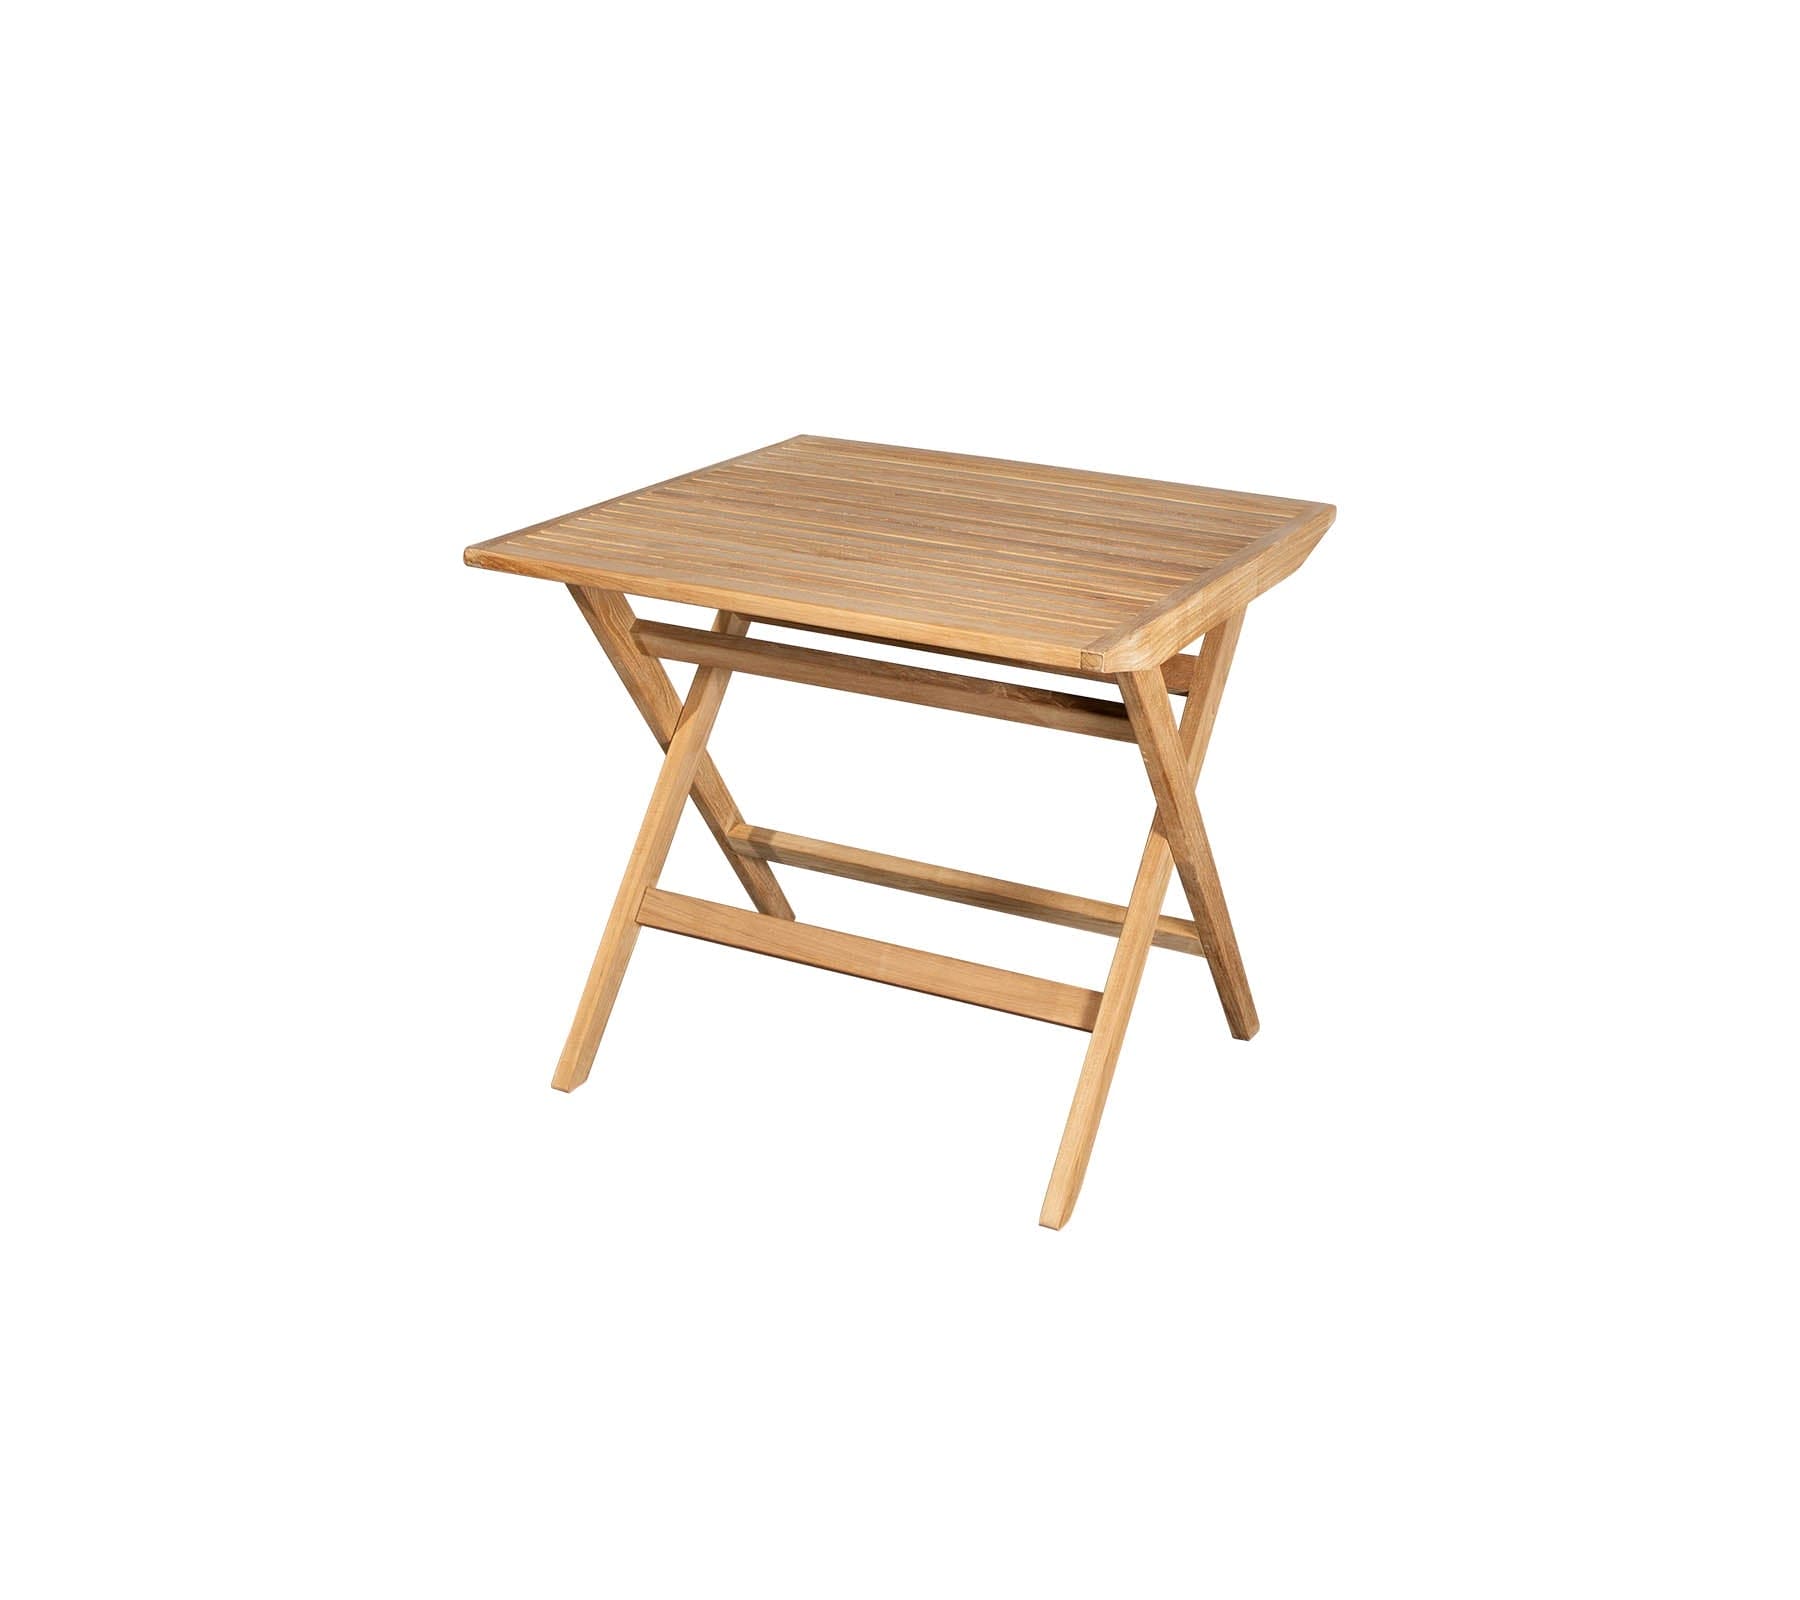 Boxhill's Flip Folding Outdoor Teak Dining Table Small, front side view in white background